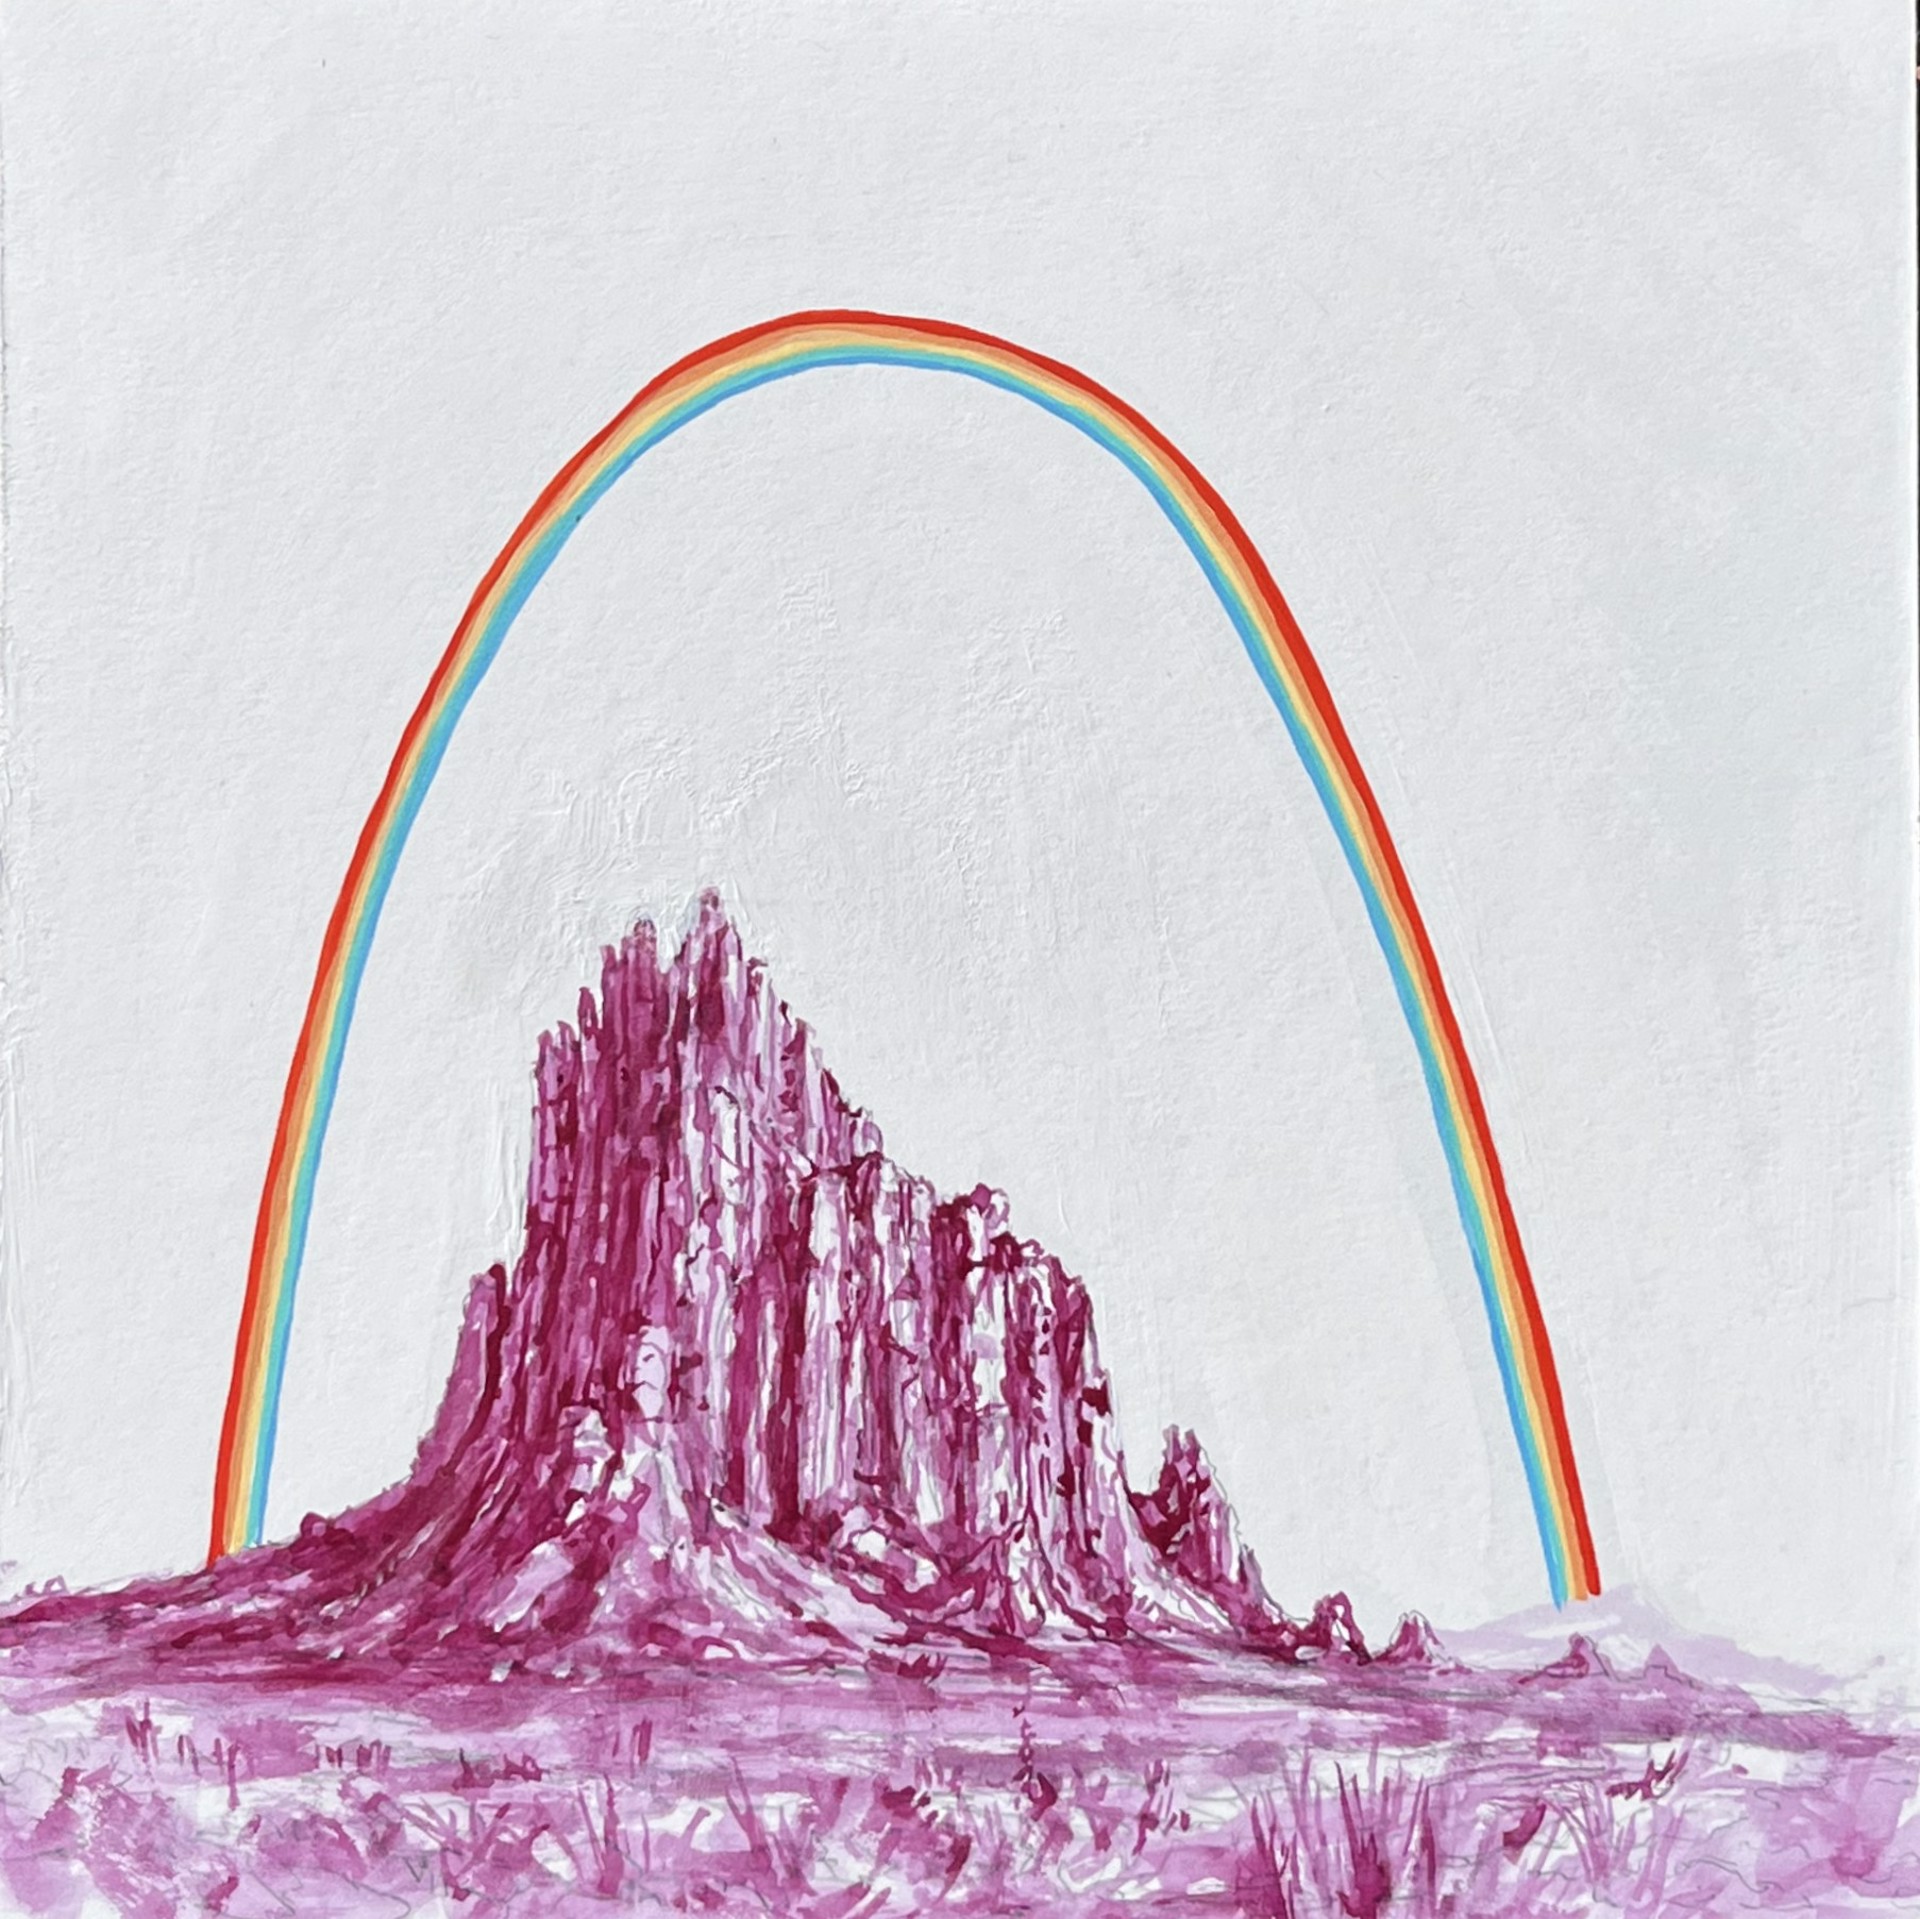 Rainbow Over Shiprock by Todd Ryan White